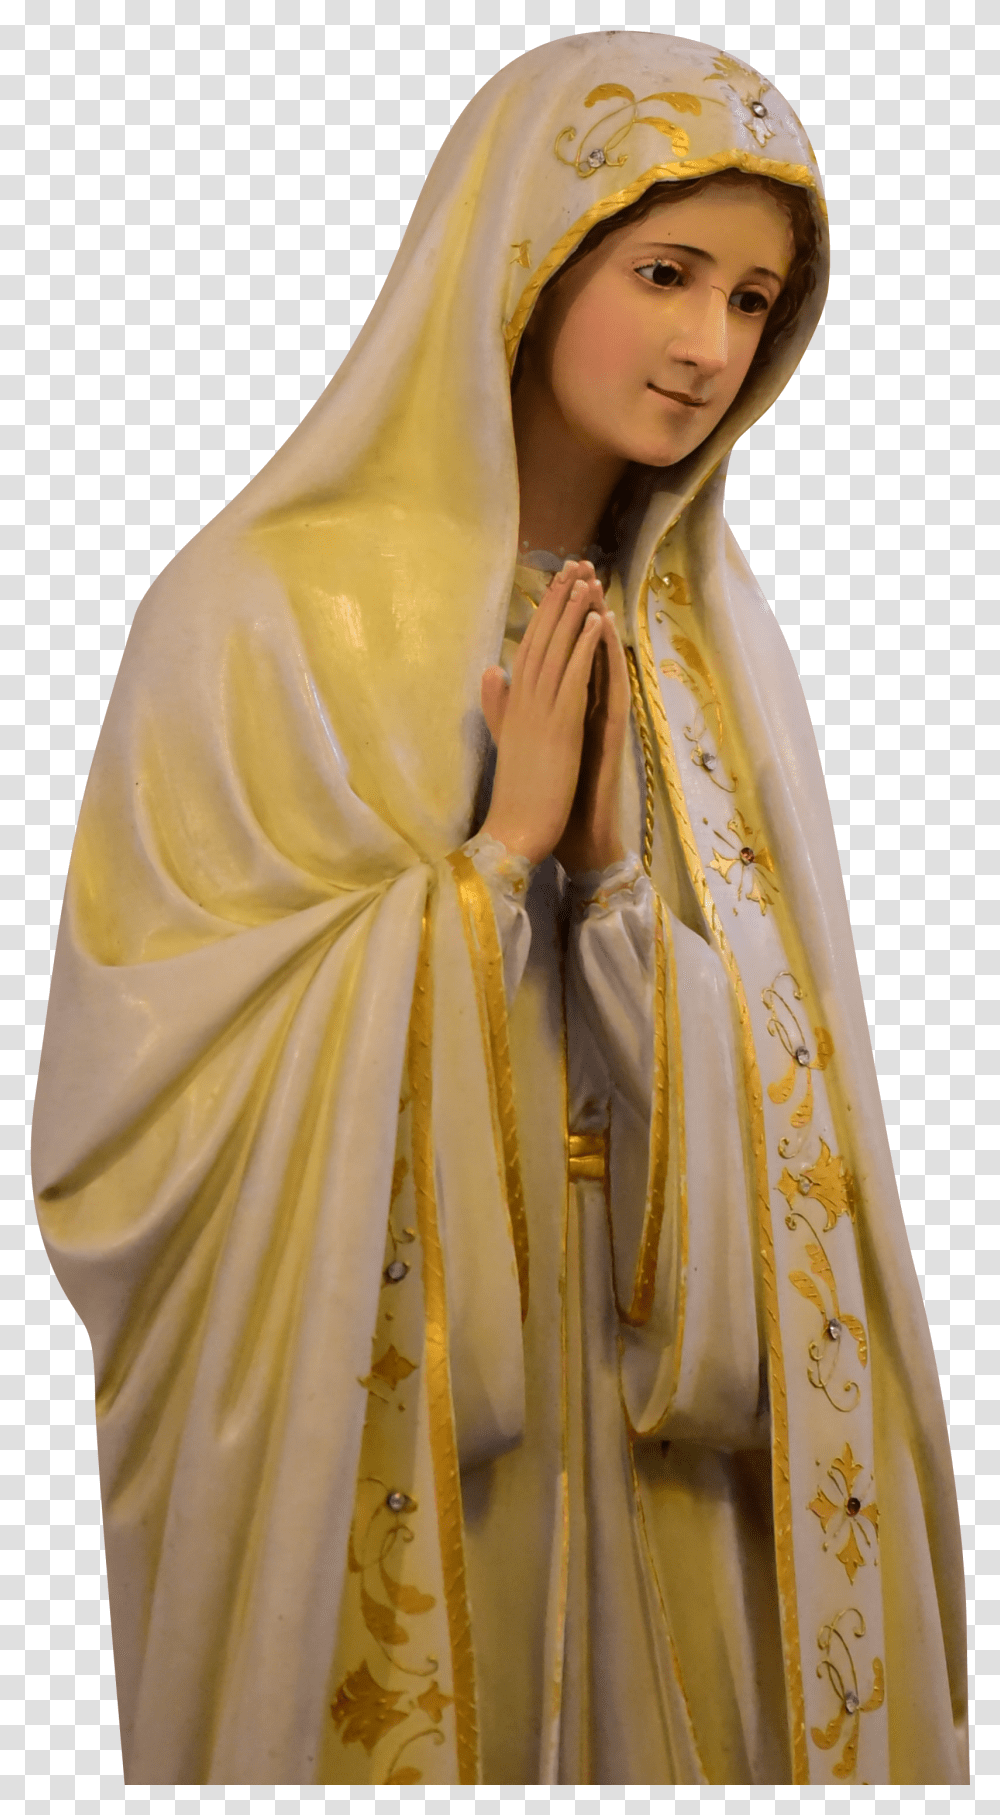 Virgin Mary Statue Virgin Mary Statue Transparent Png